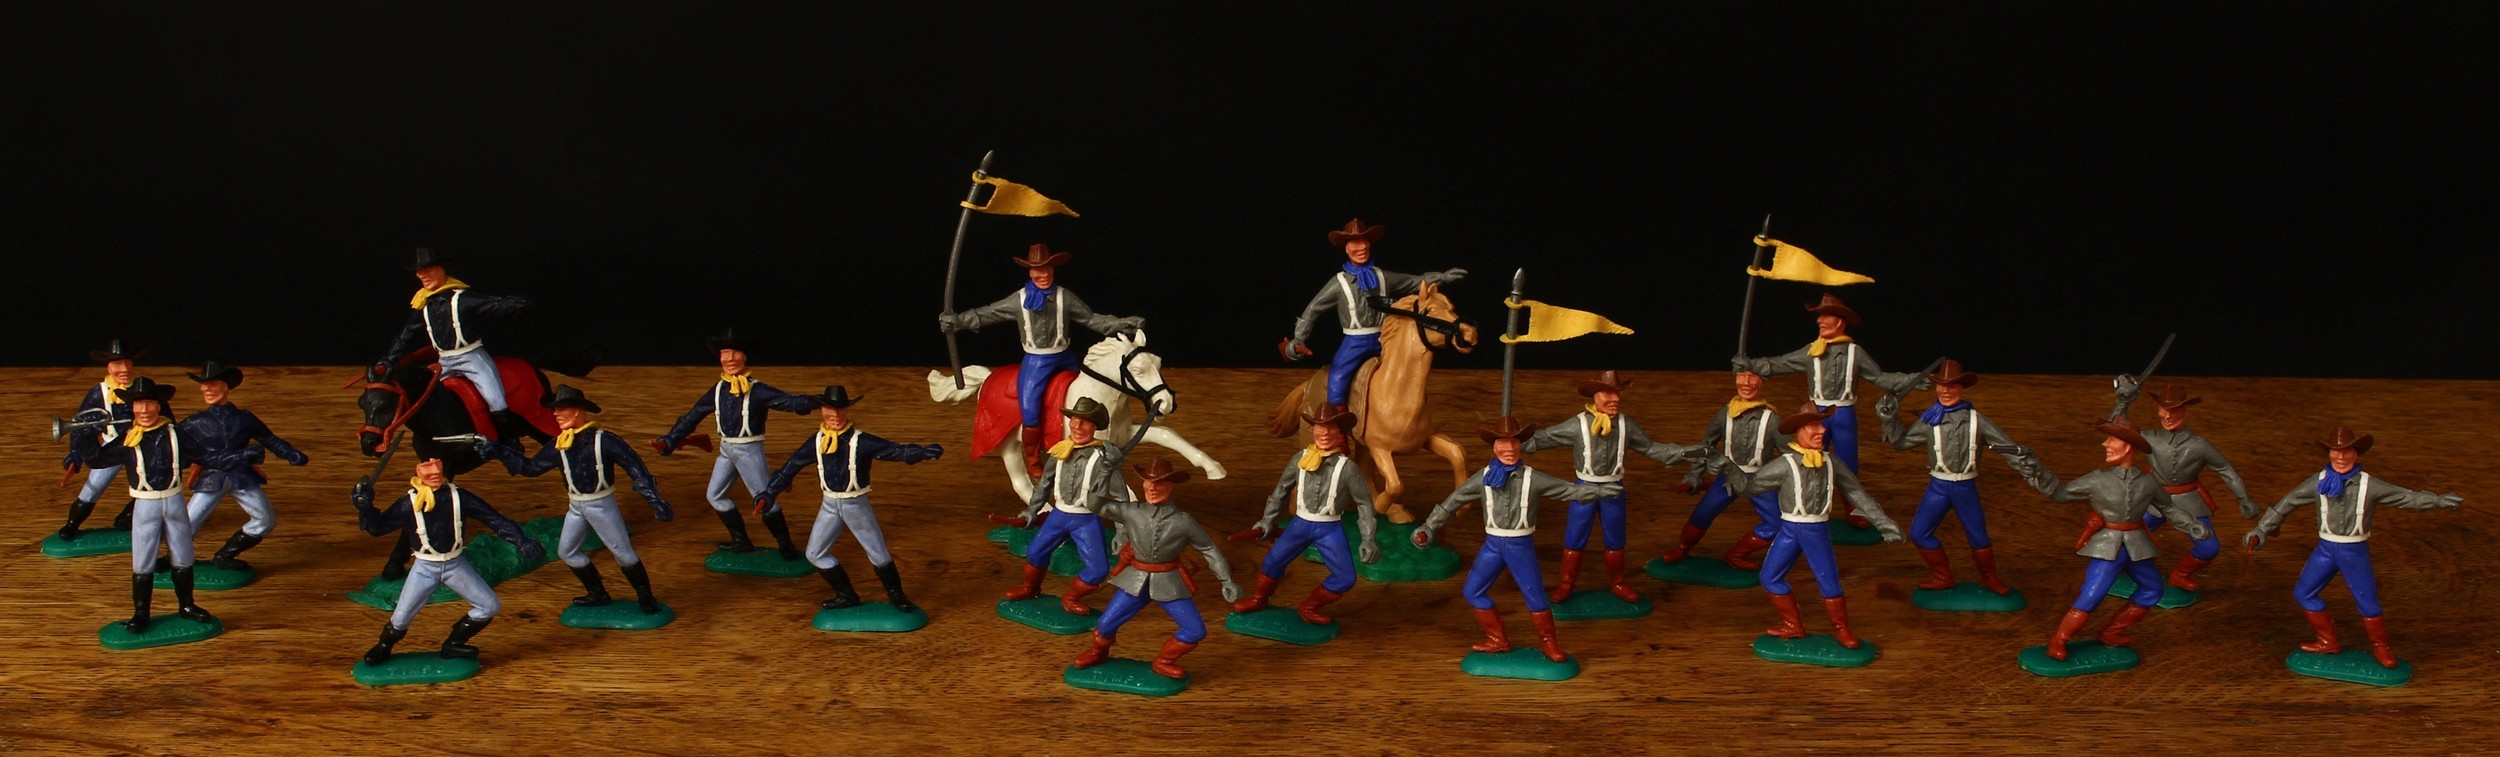 Timpo Toys plastic 'Swoppet' figures, comprising a U.S. 7th Cavalry figure, mounted on horseback,